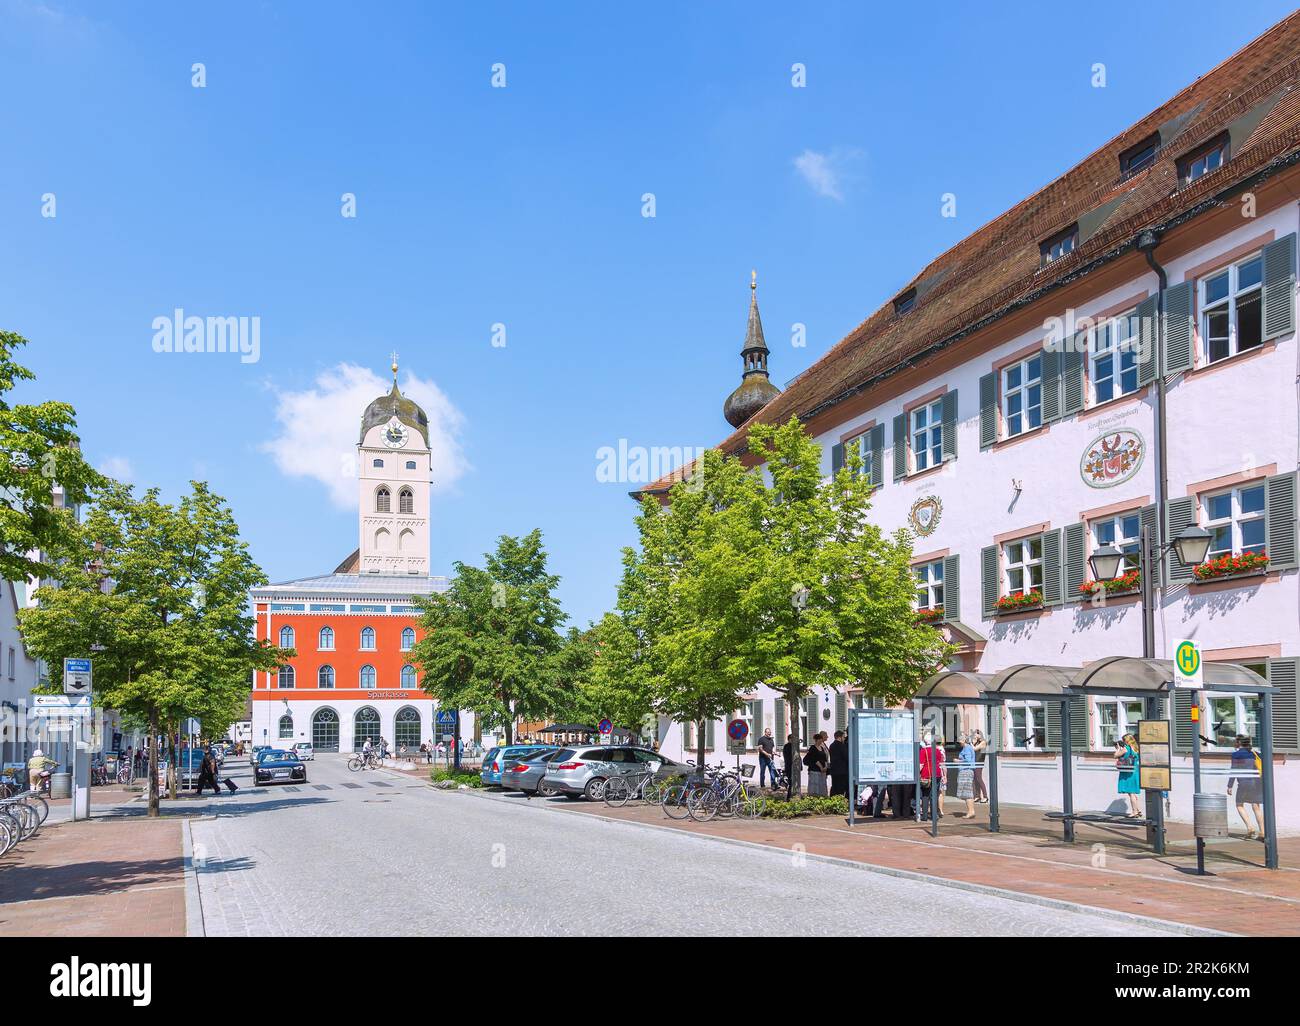 Erding, Landshuter Strasse with town hall and city tower Stock Photo